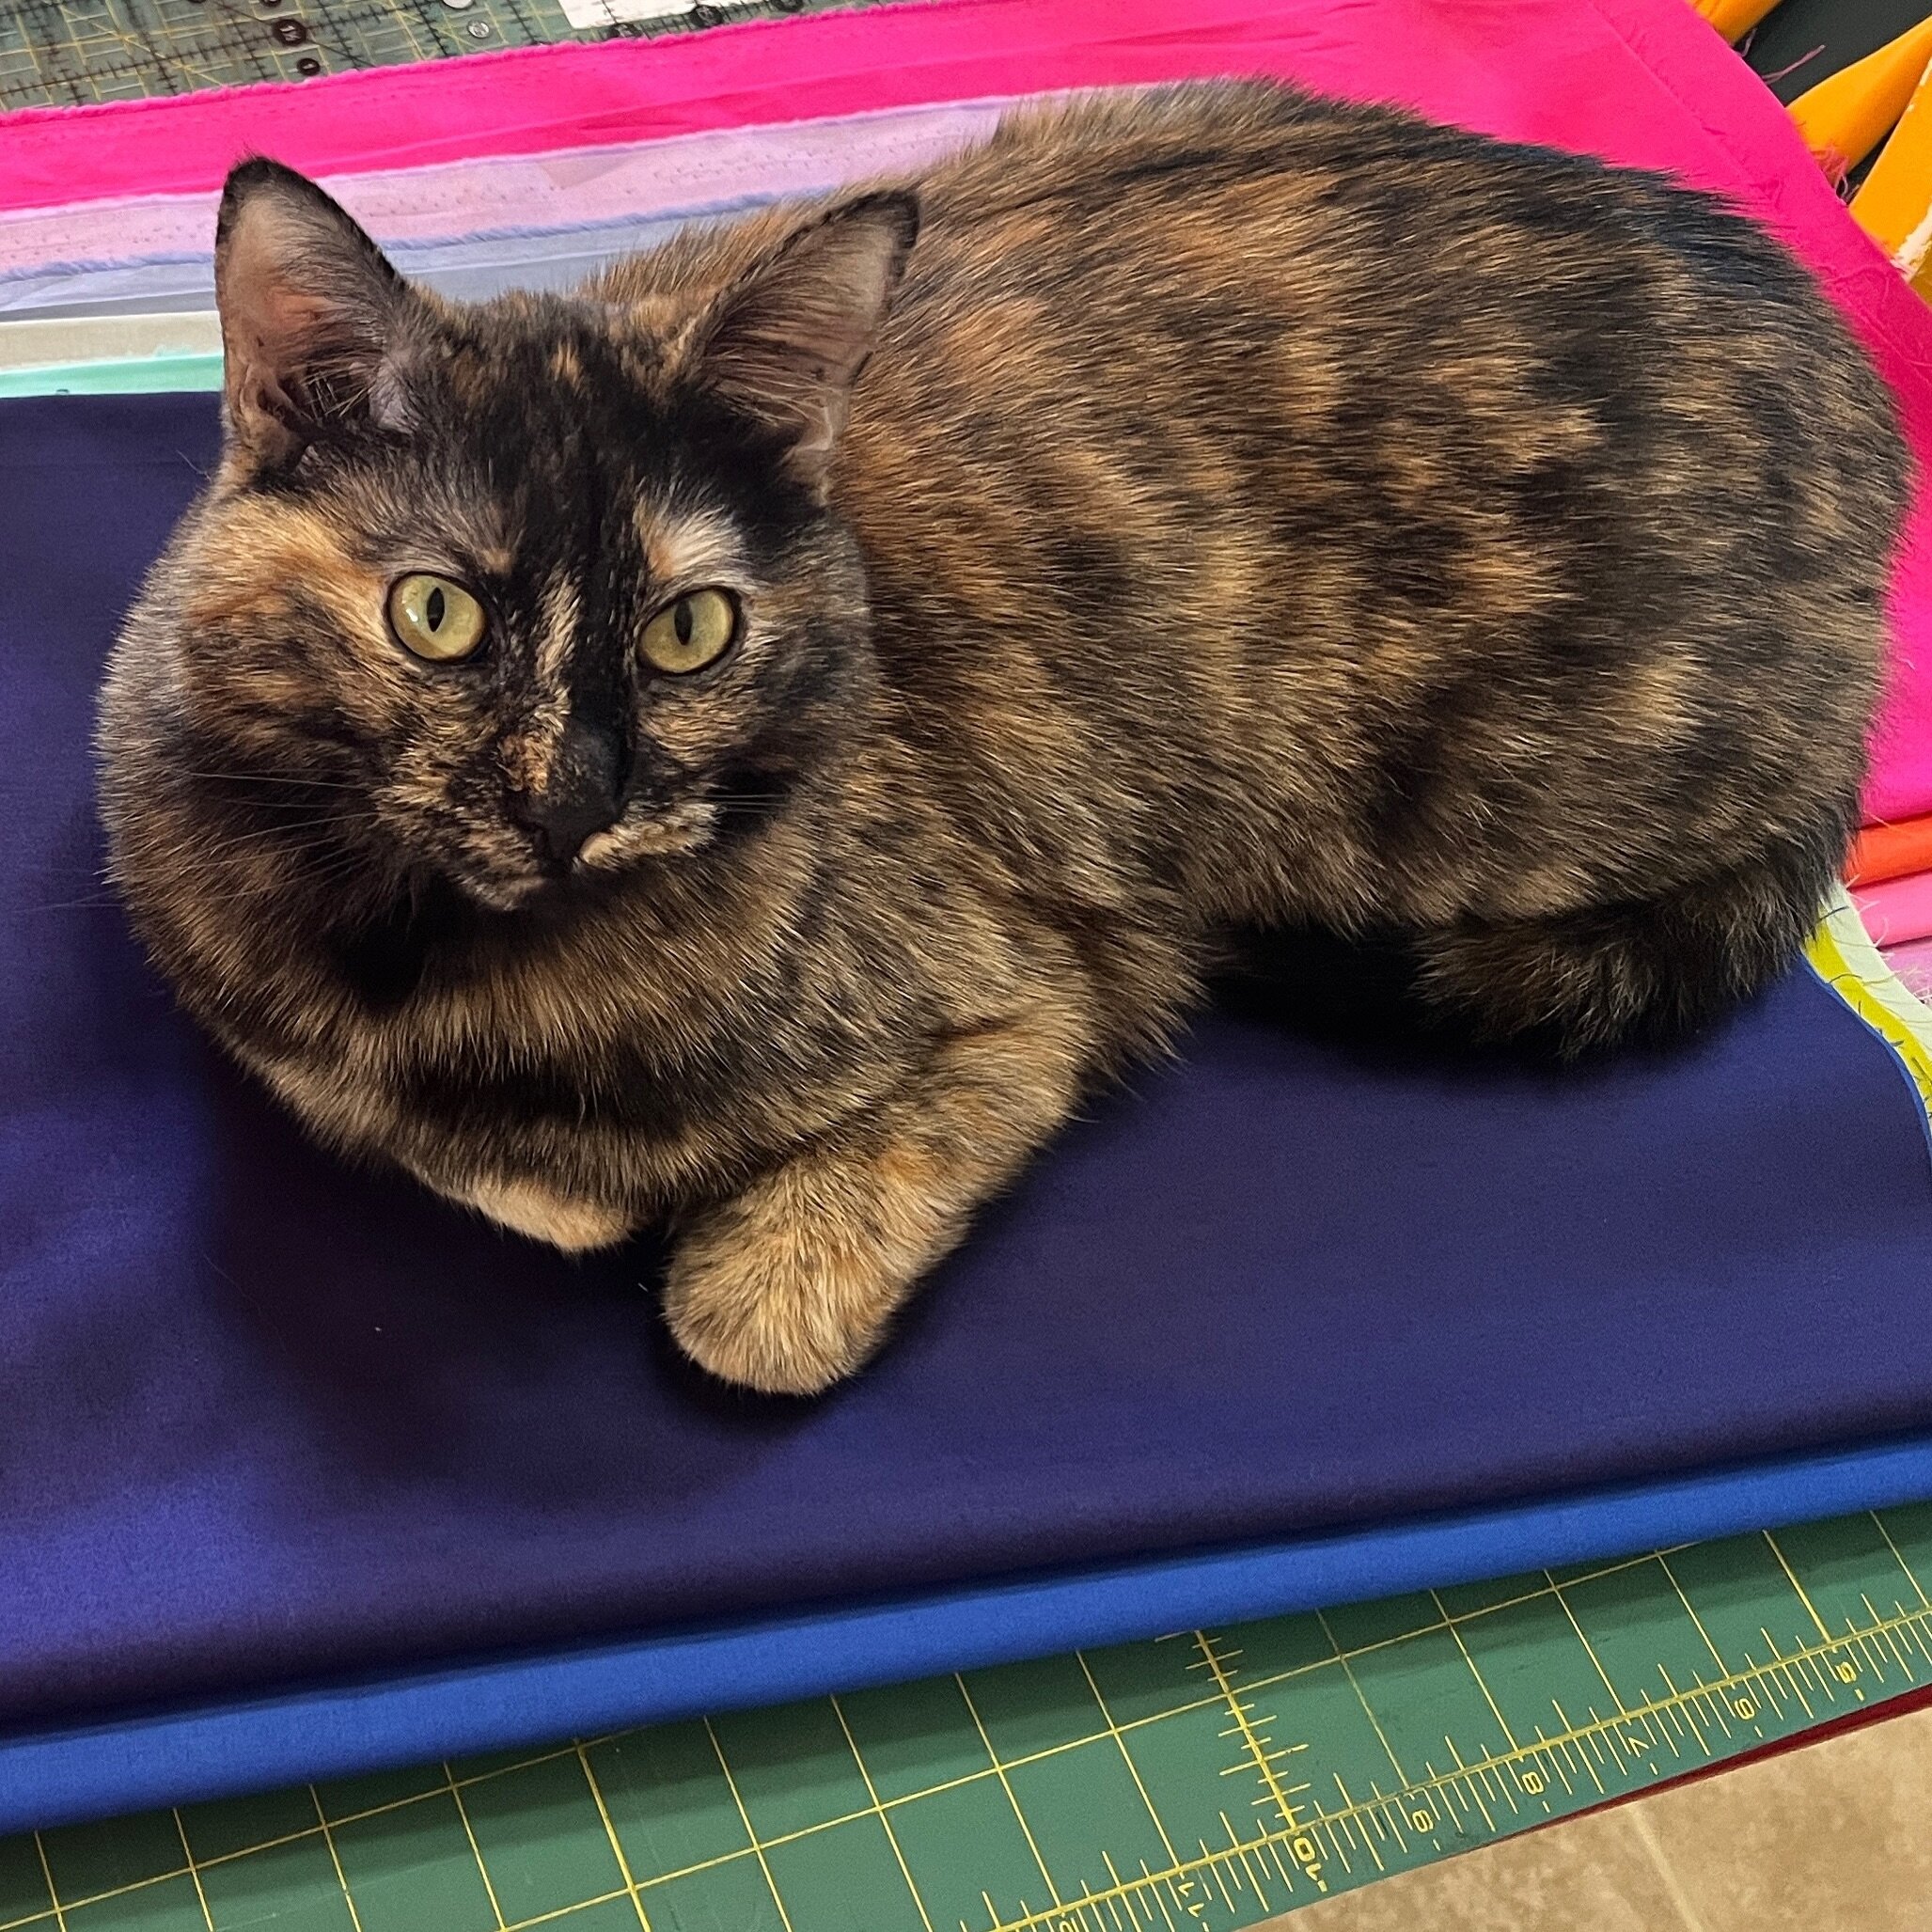 Fabric pull by Moira. 😻

Starting a new project using #rubyandbeesolids from @windhamfabrics 💖

They kindly sent me a bundle of fabric and I can&rsquo;t wait to get started. 🧵

#windhamfabrics #catsonquilts #catsonquiltsofinstagram #modernquilter 